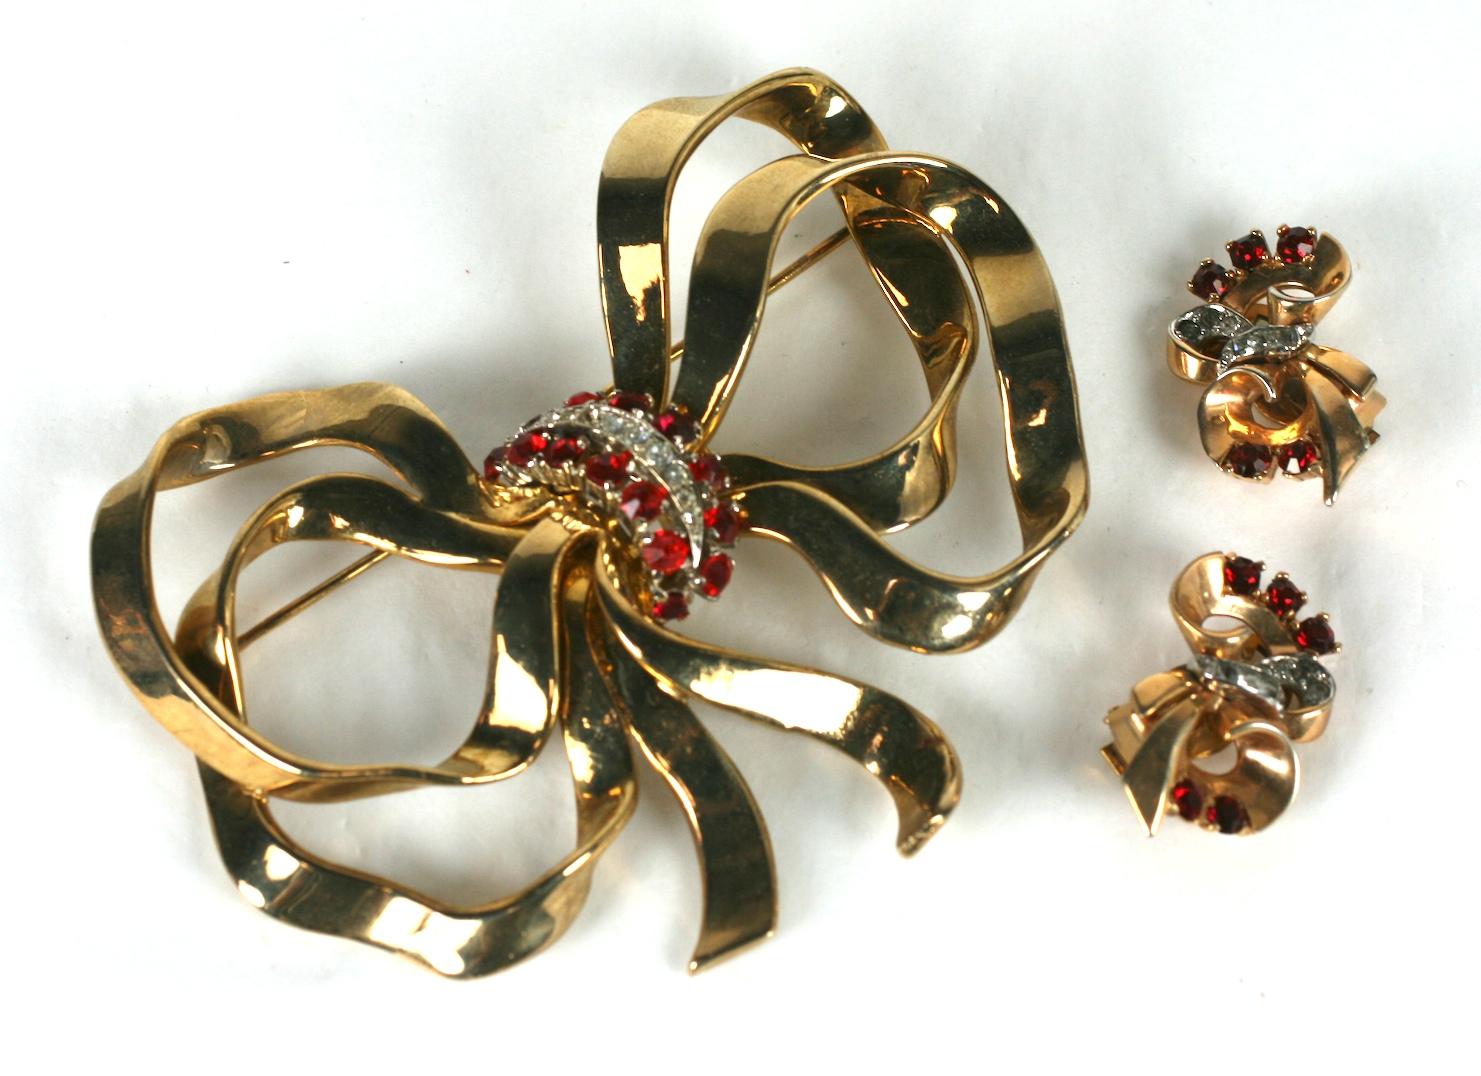 Mazer Retro Bow Knot Brooch Demi Parure In Good Condition For Sale In New York, NY